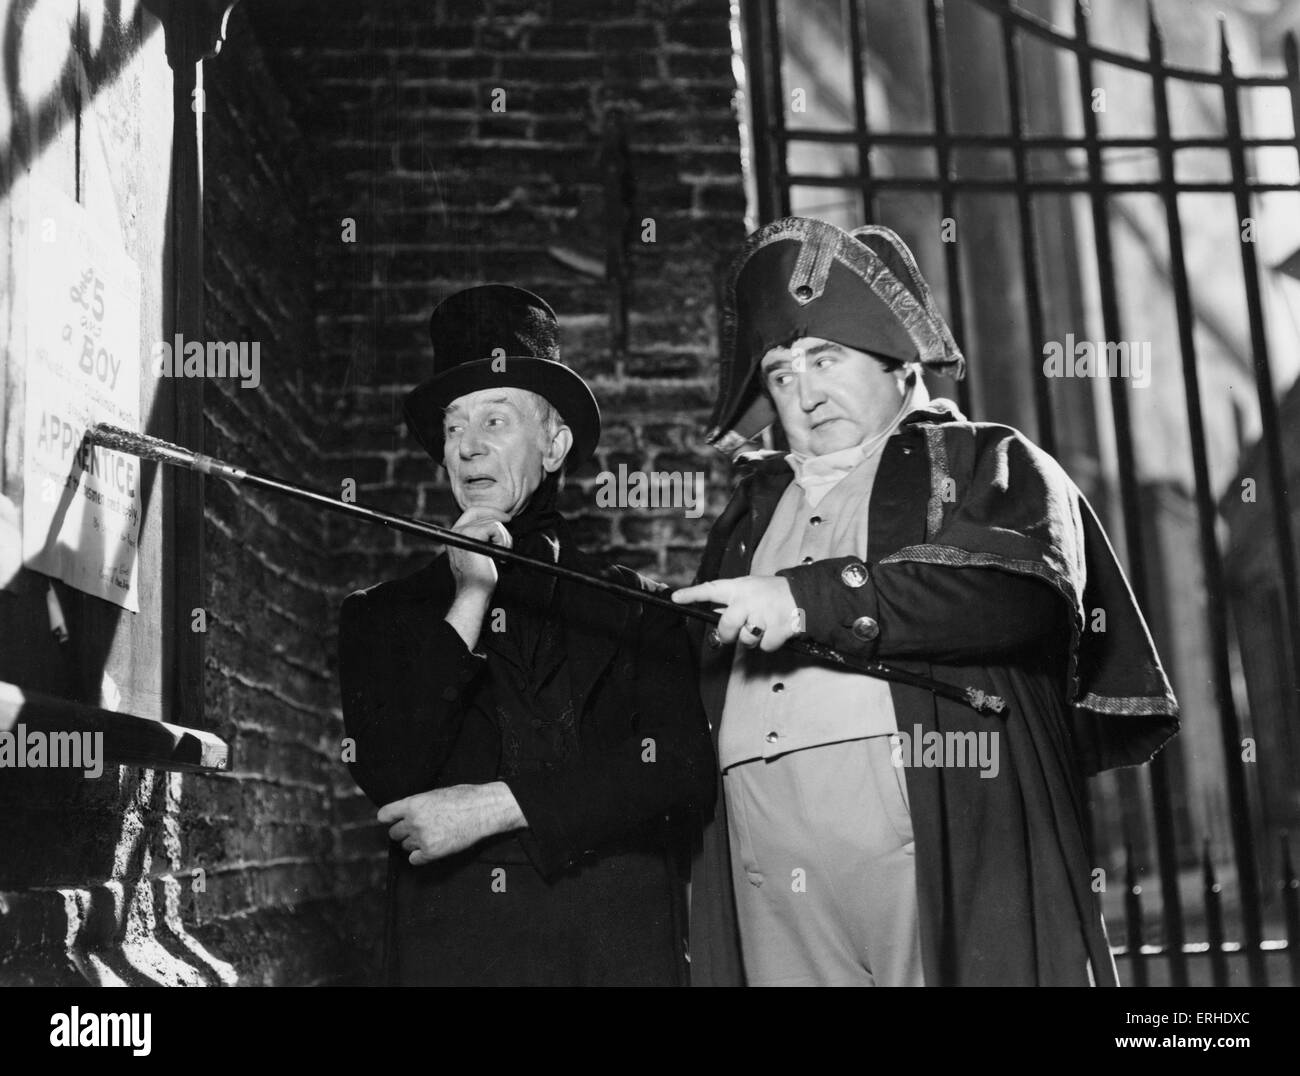 Oliver Twist. Film still from 1948 Rank Film production of Charles Dickens ' book. British novelist, 7 February 1812 - 9 June Stock Photo